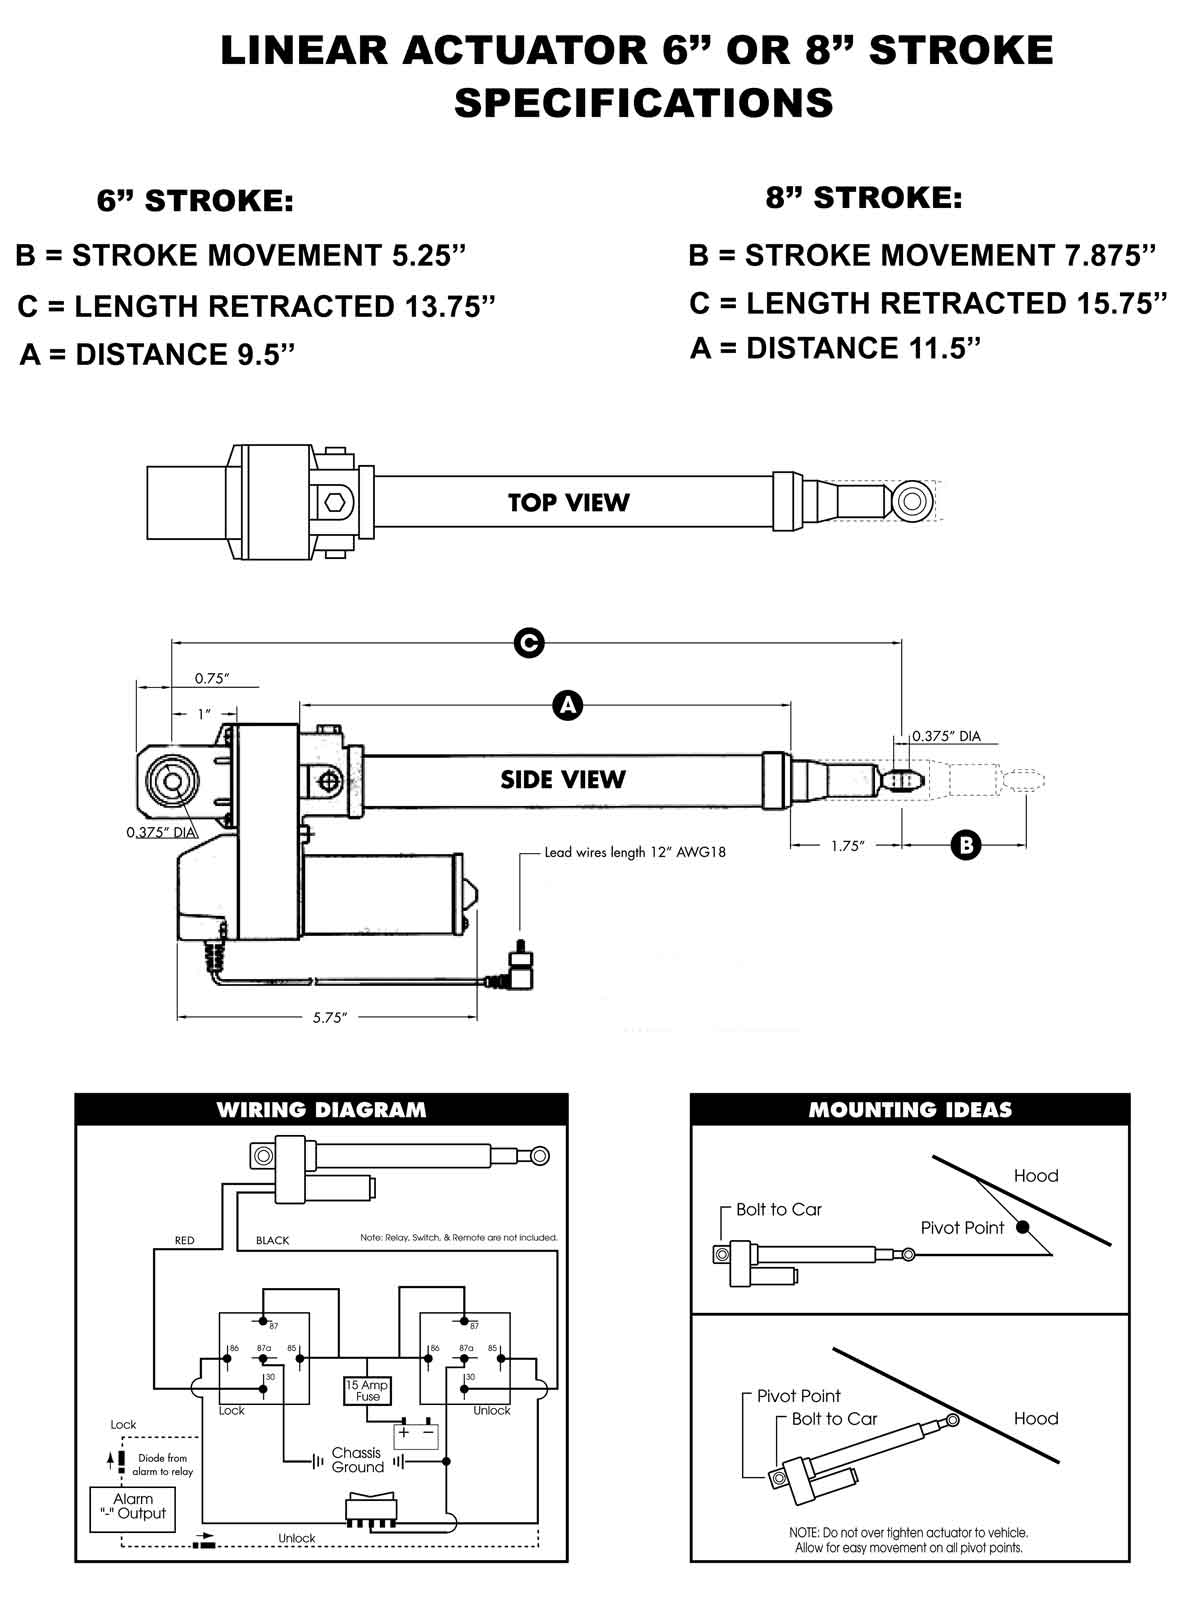 Basic Automatic Lambo Door Conversion Kit Upgrade w/ 6 inch Stroke Linear Actuators (No Remotes or Door Openers).